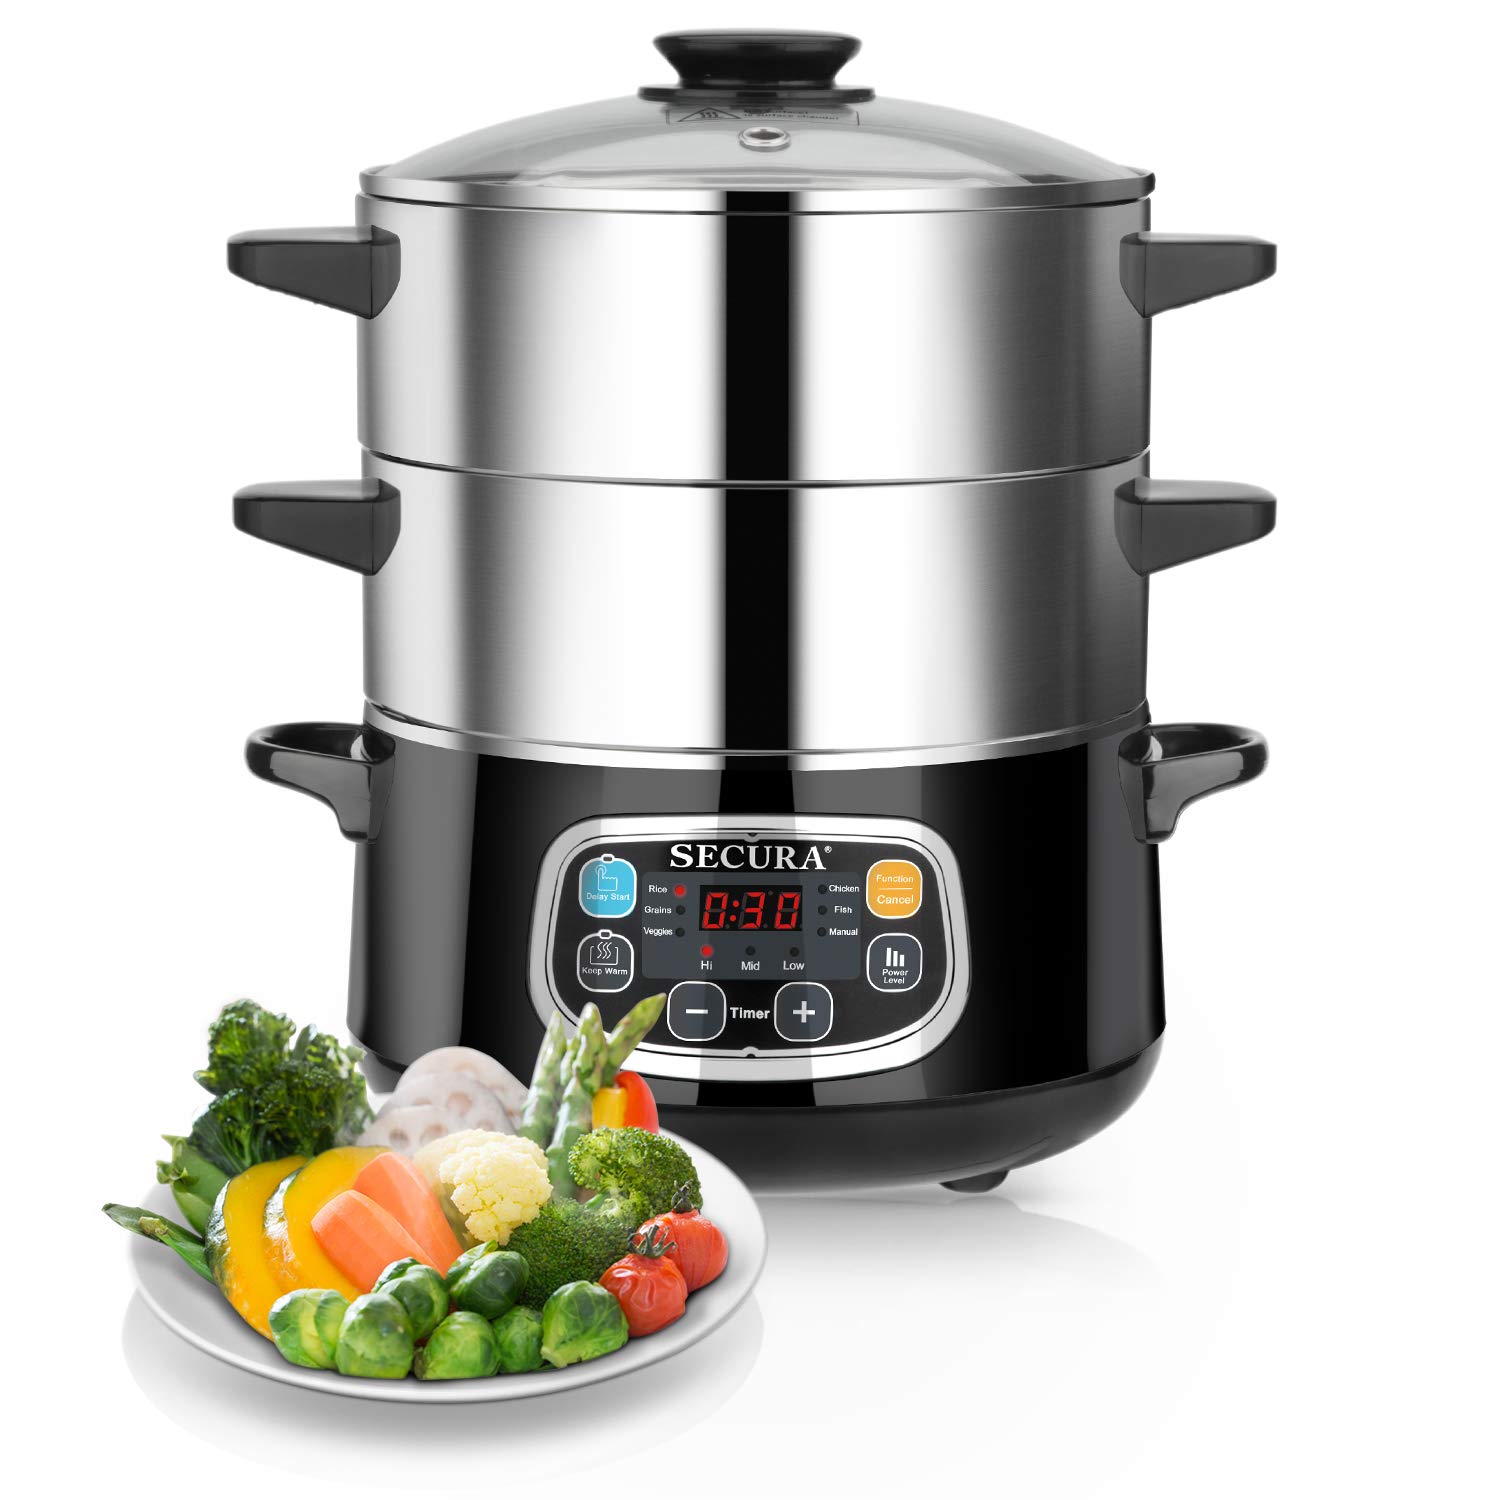 Secura Stainless Steel Electric Food Steamer, 8.5-Quart